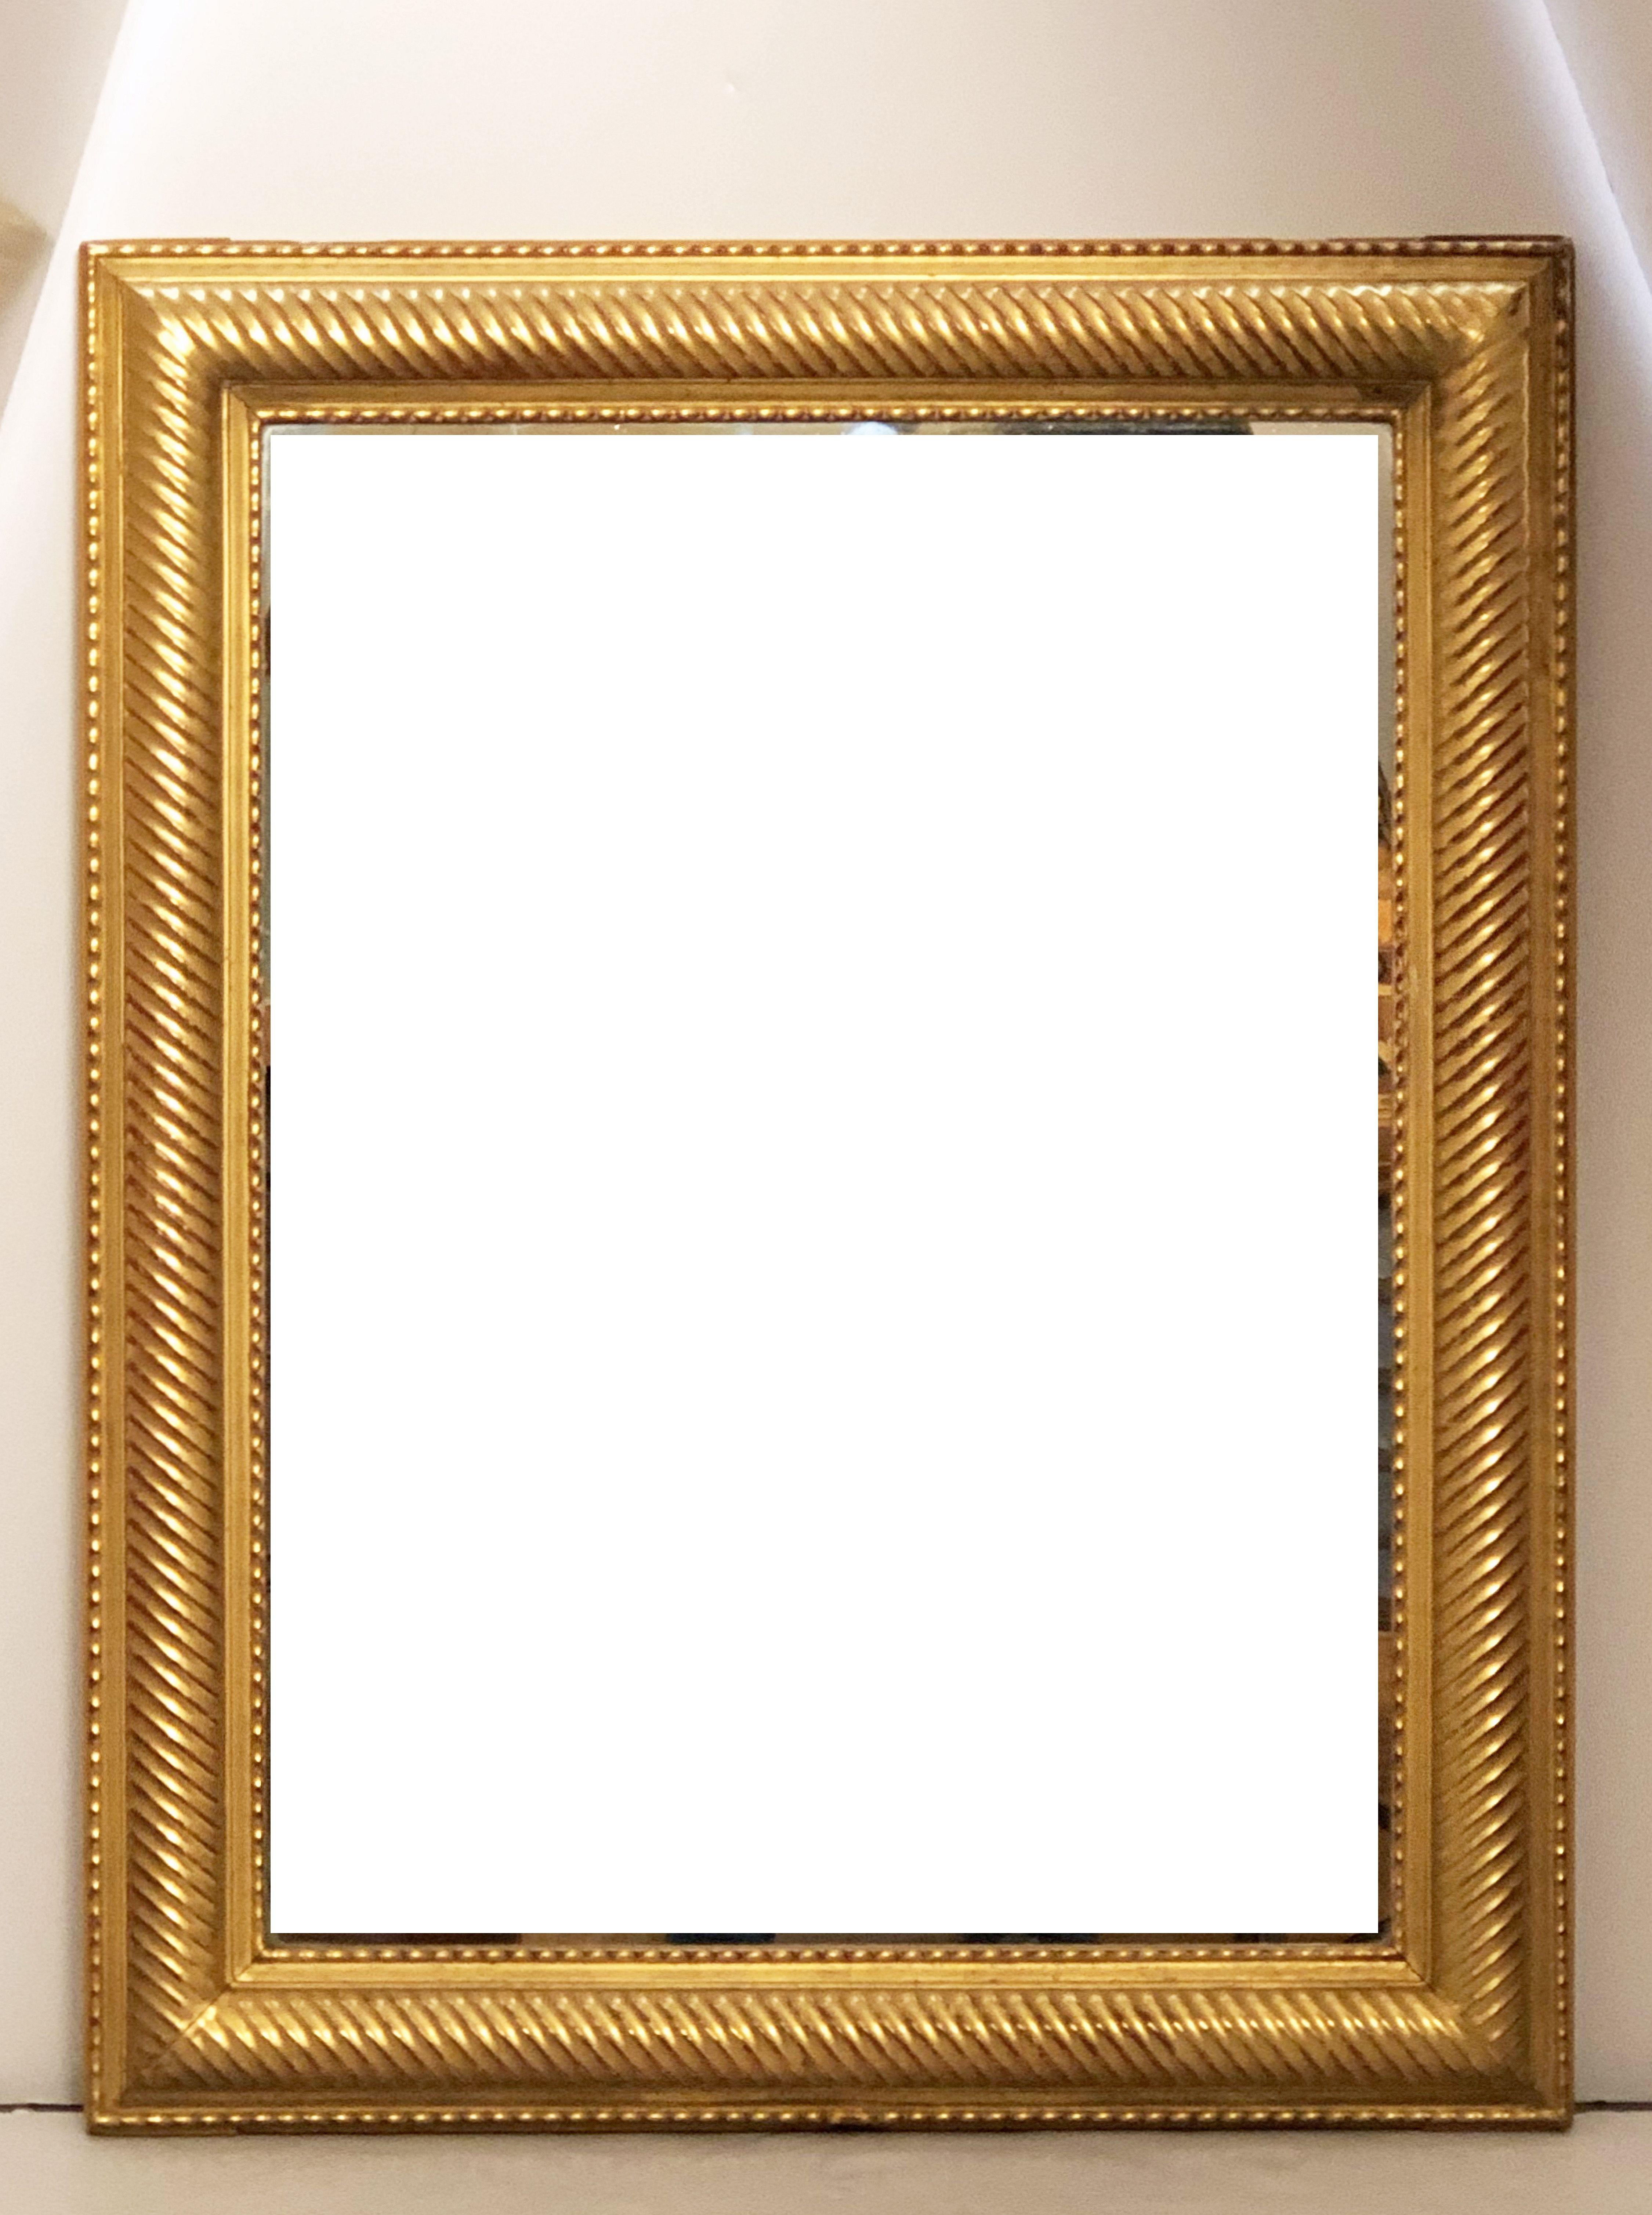 A handsome French gilt rectangular wall mirror featuring a raised, ribbed edge around the circumference and a lovely warm gold-leaf patina.

Ready to hang - Can be displayed vertically or horizontally

Dimensions: H 39 inches x W 30 3/4 inches x